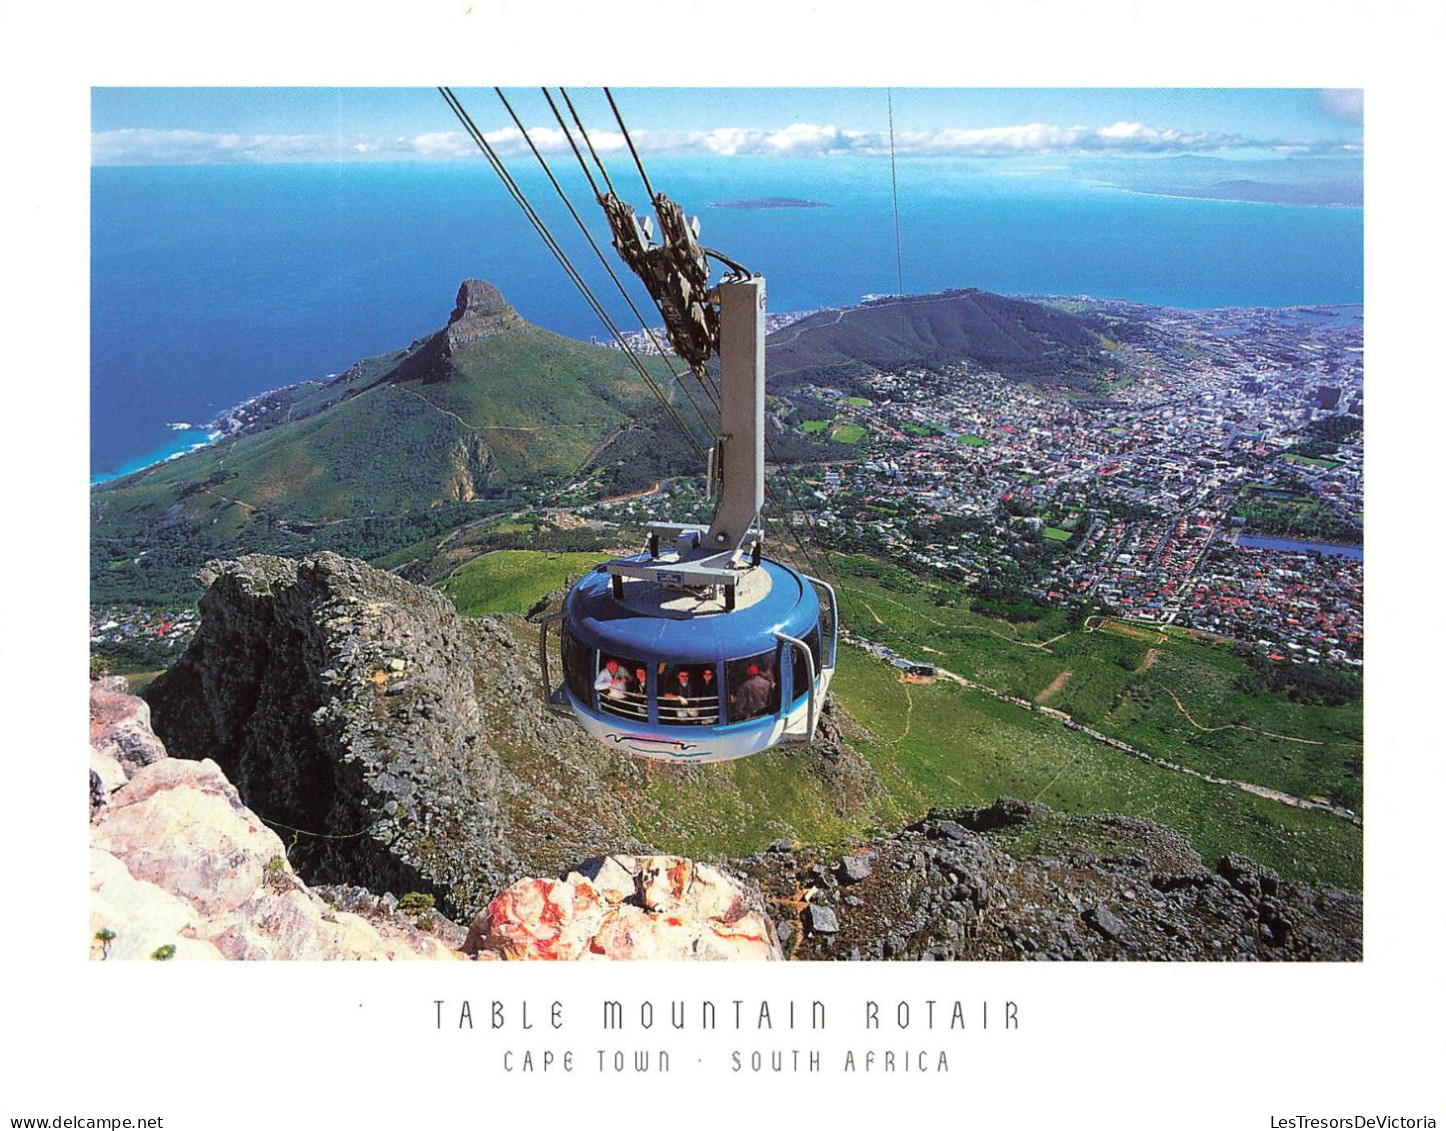 AFRIQUE DU SUD - Cape Town - South Africa - View From The Top Of Table Mountain Ot The Rotair - Carte Postale - Afrique Du Sud